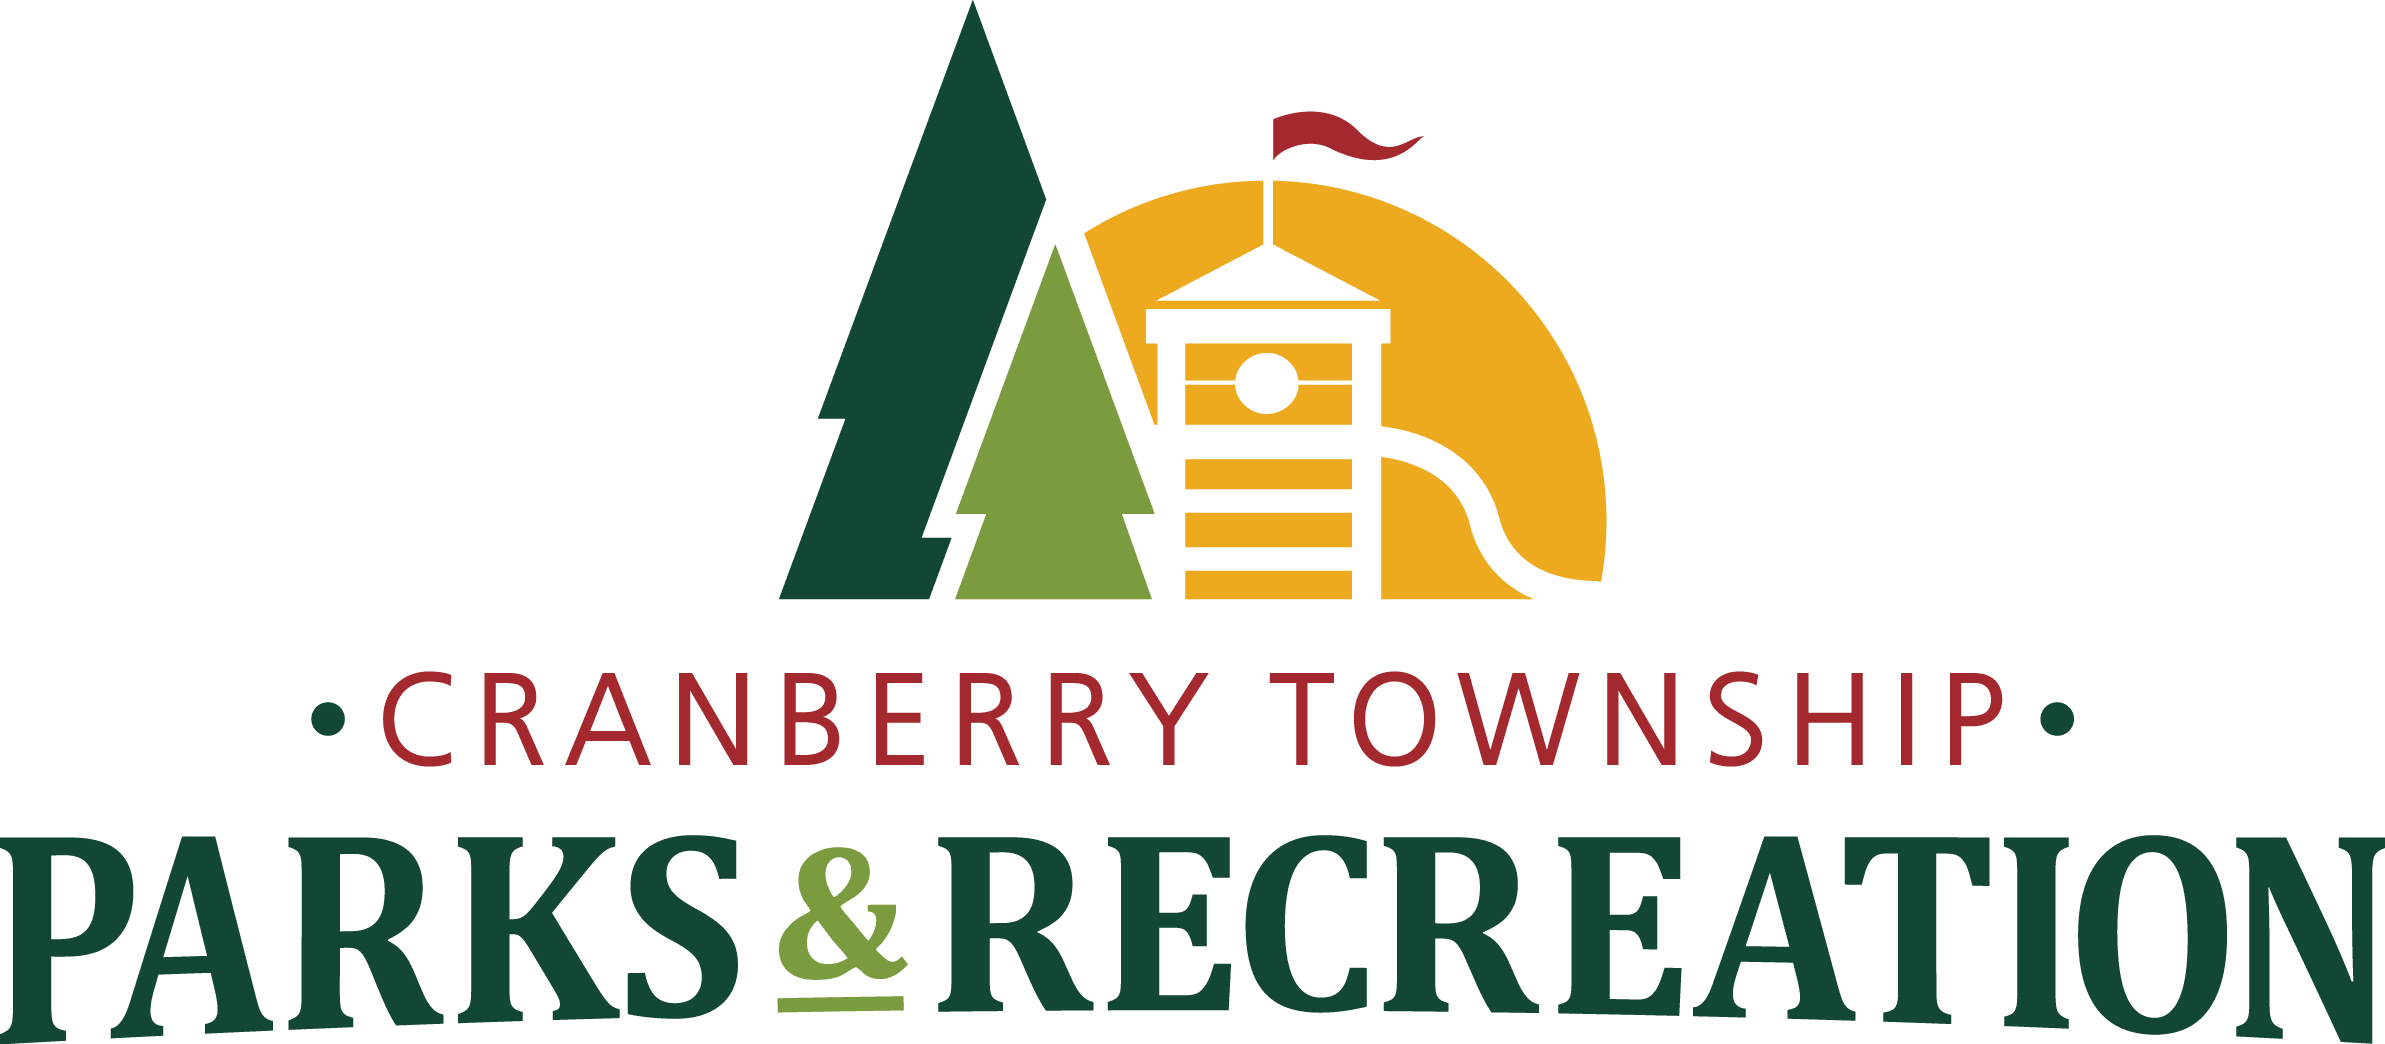 Parks and Recreation Logo - Parks & Recreation | Cranberry Township - Official Website